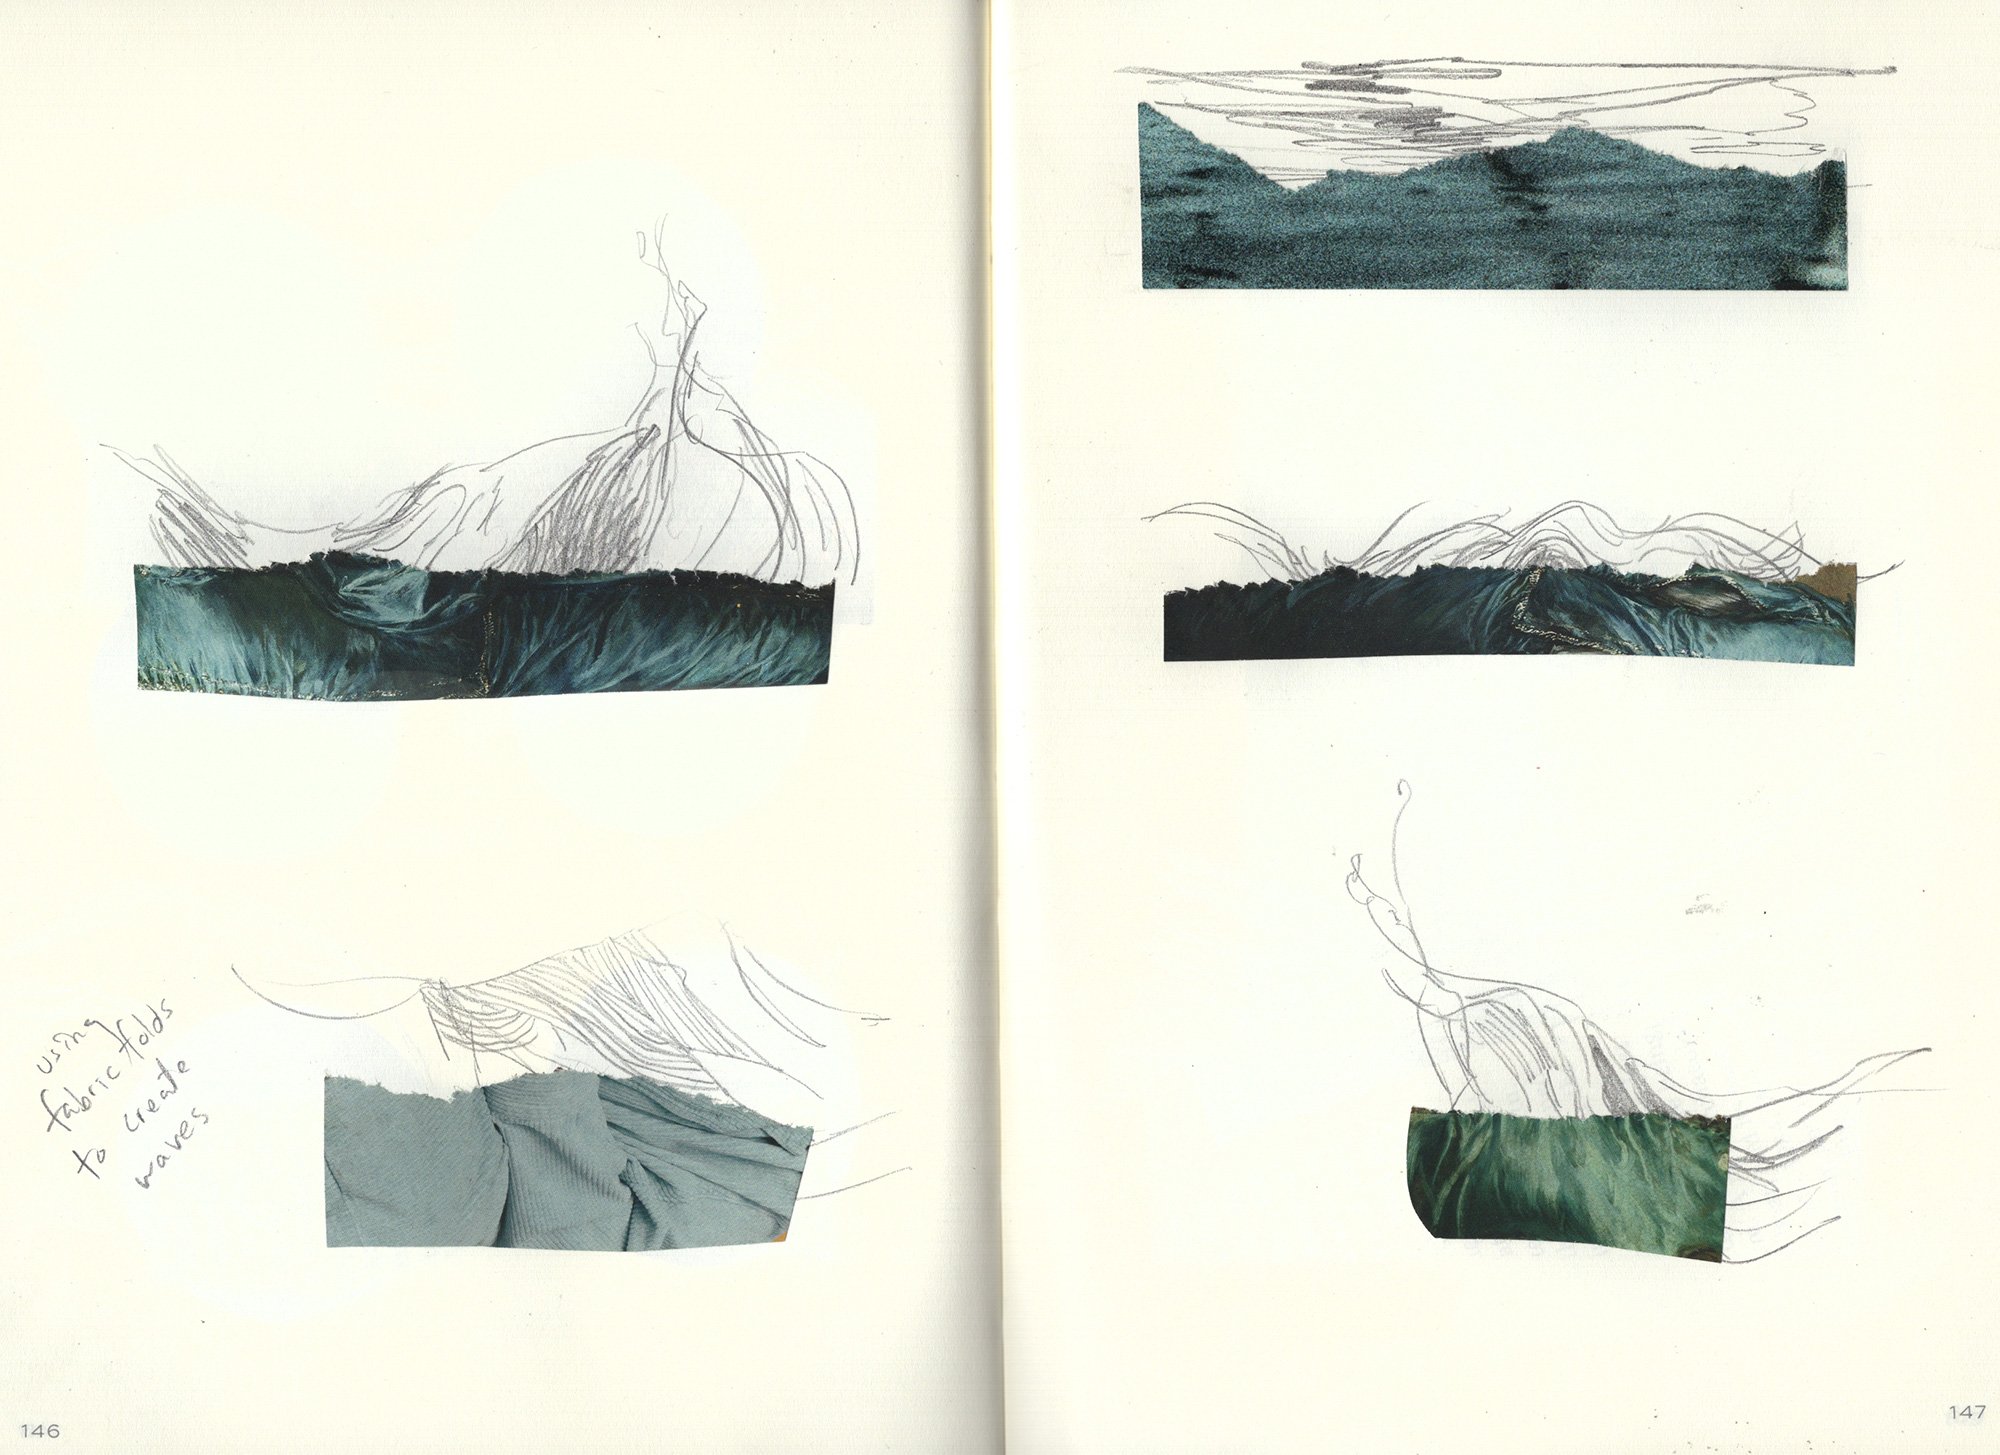 Sketches of waves